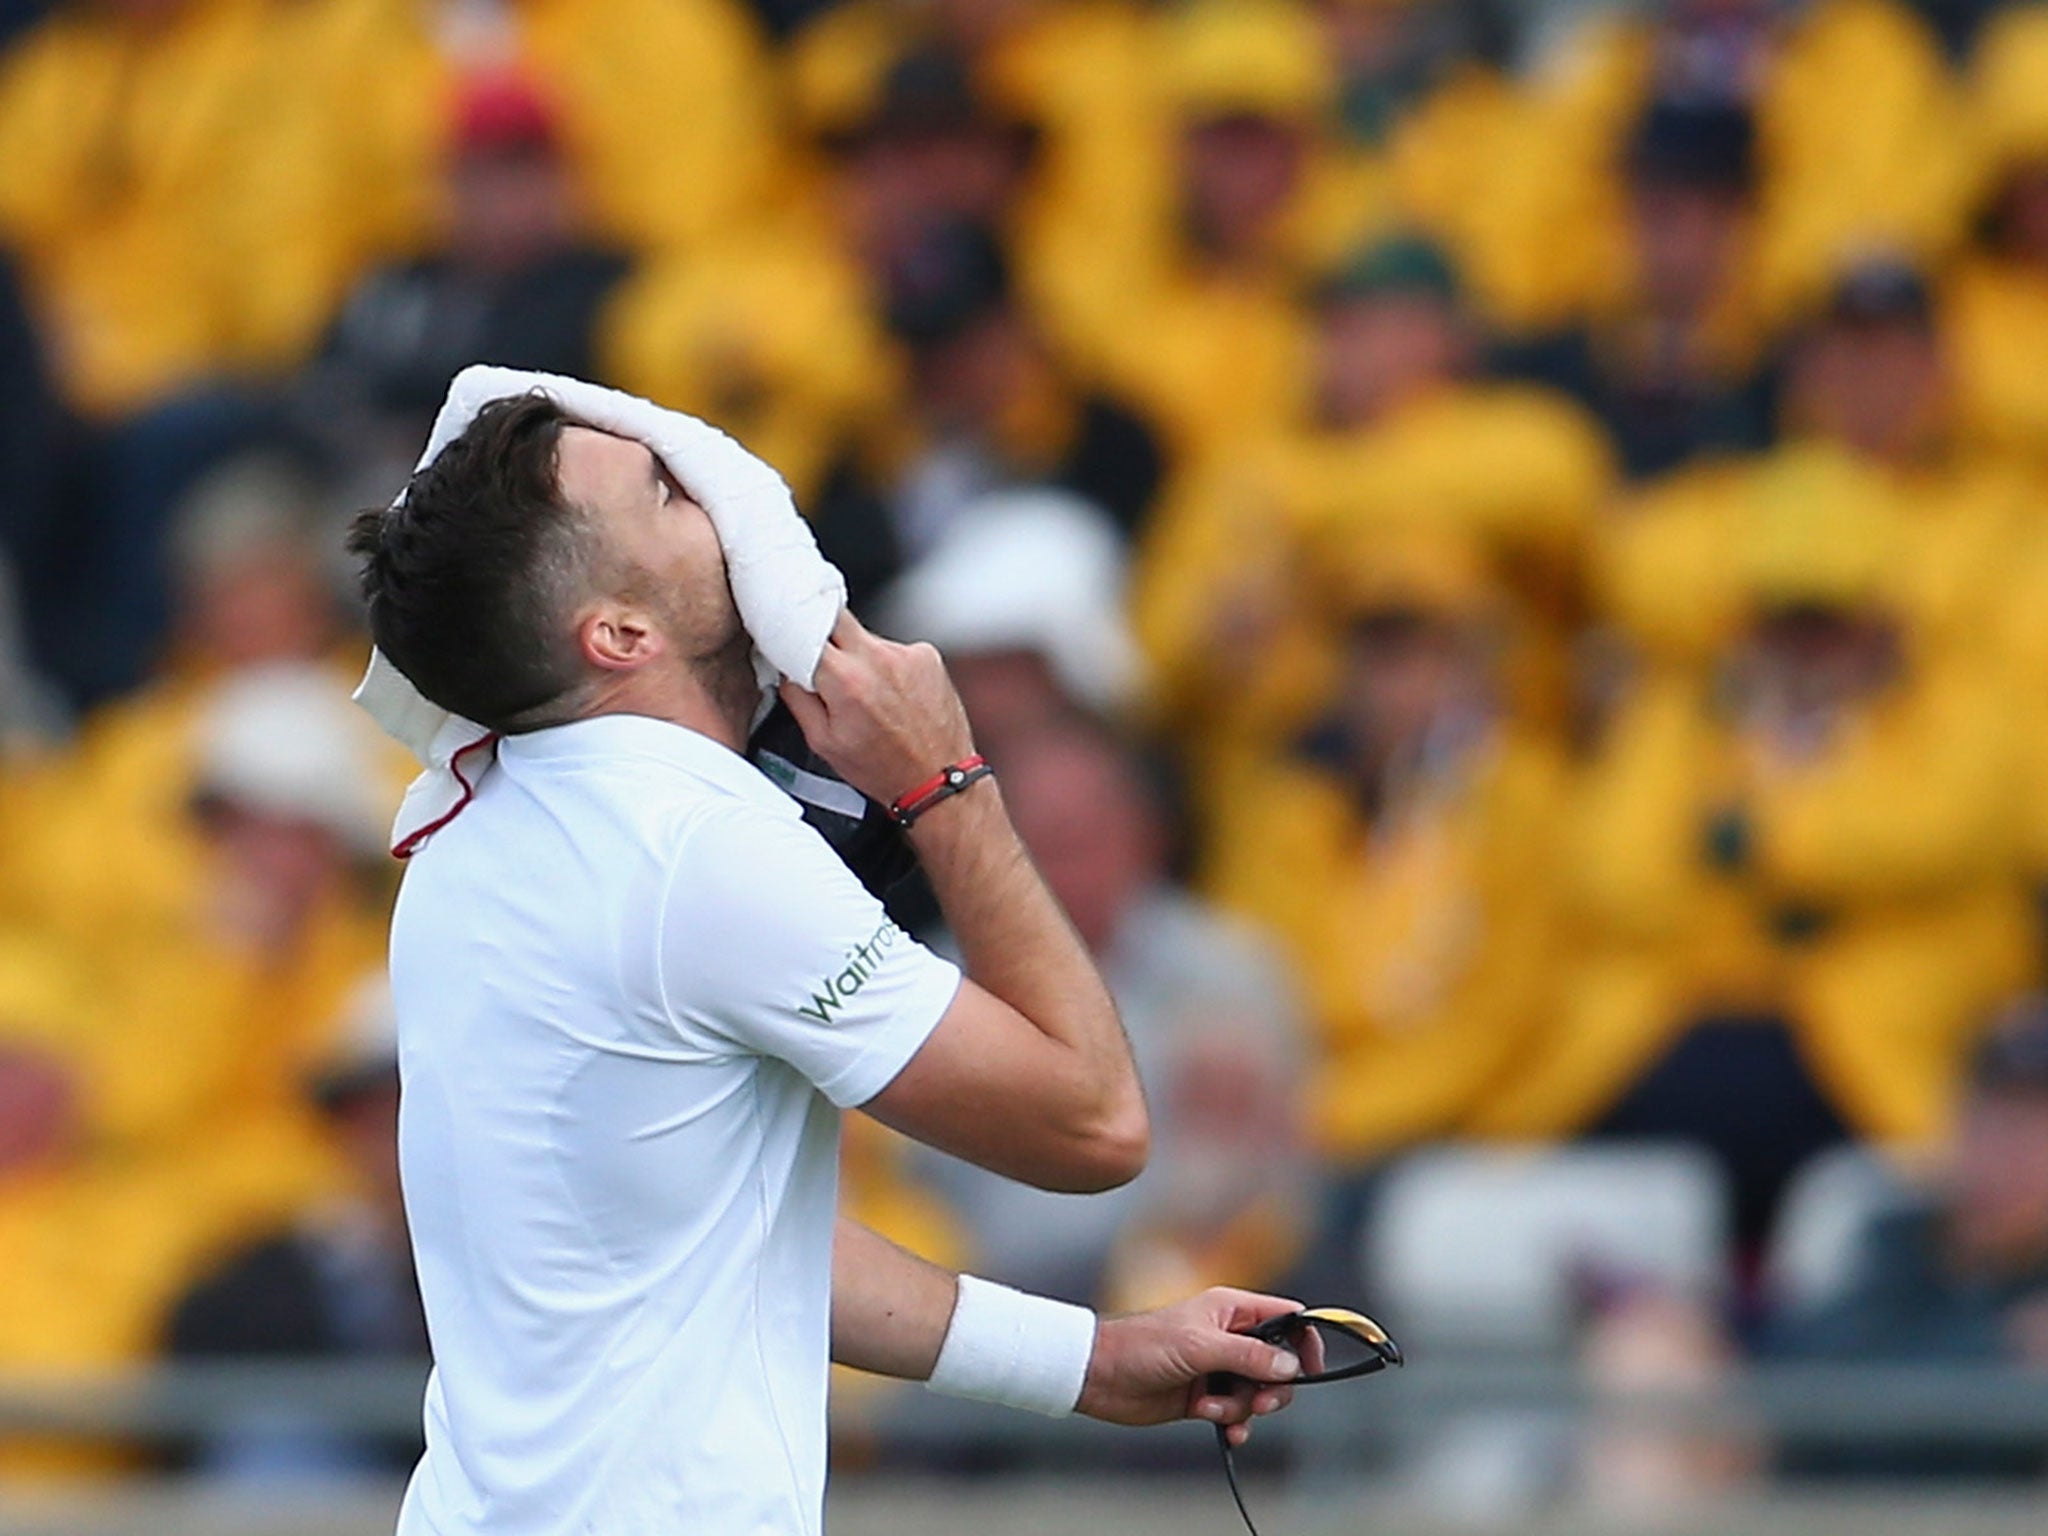 James Anderson will miss the Fourth Test and could be out of action for up to six weeks